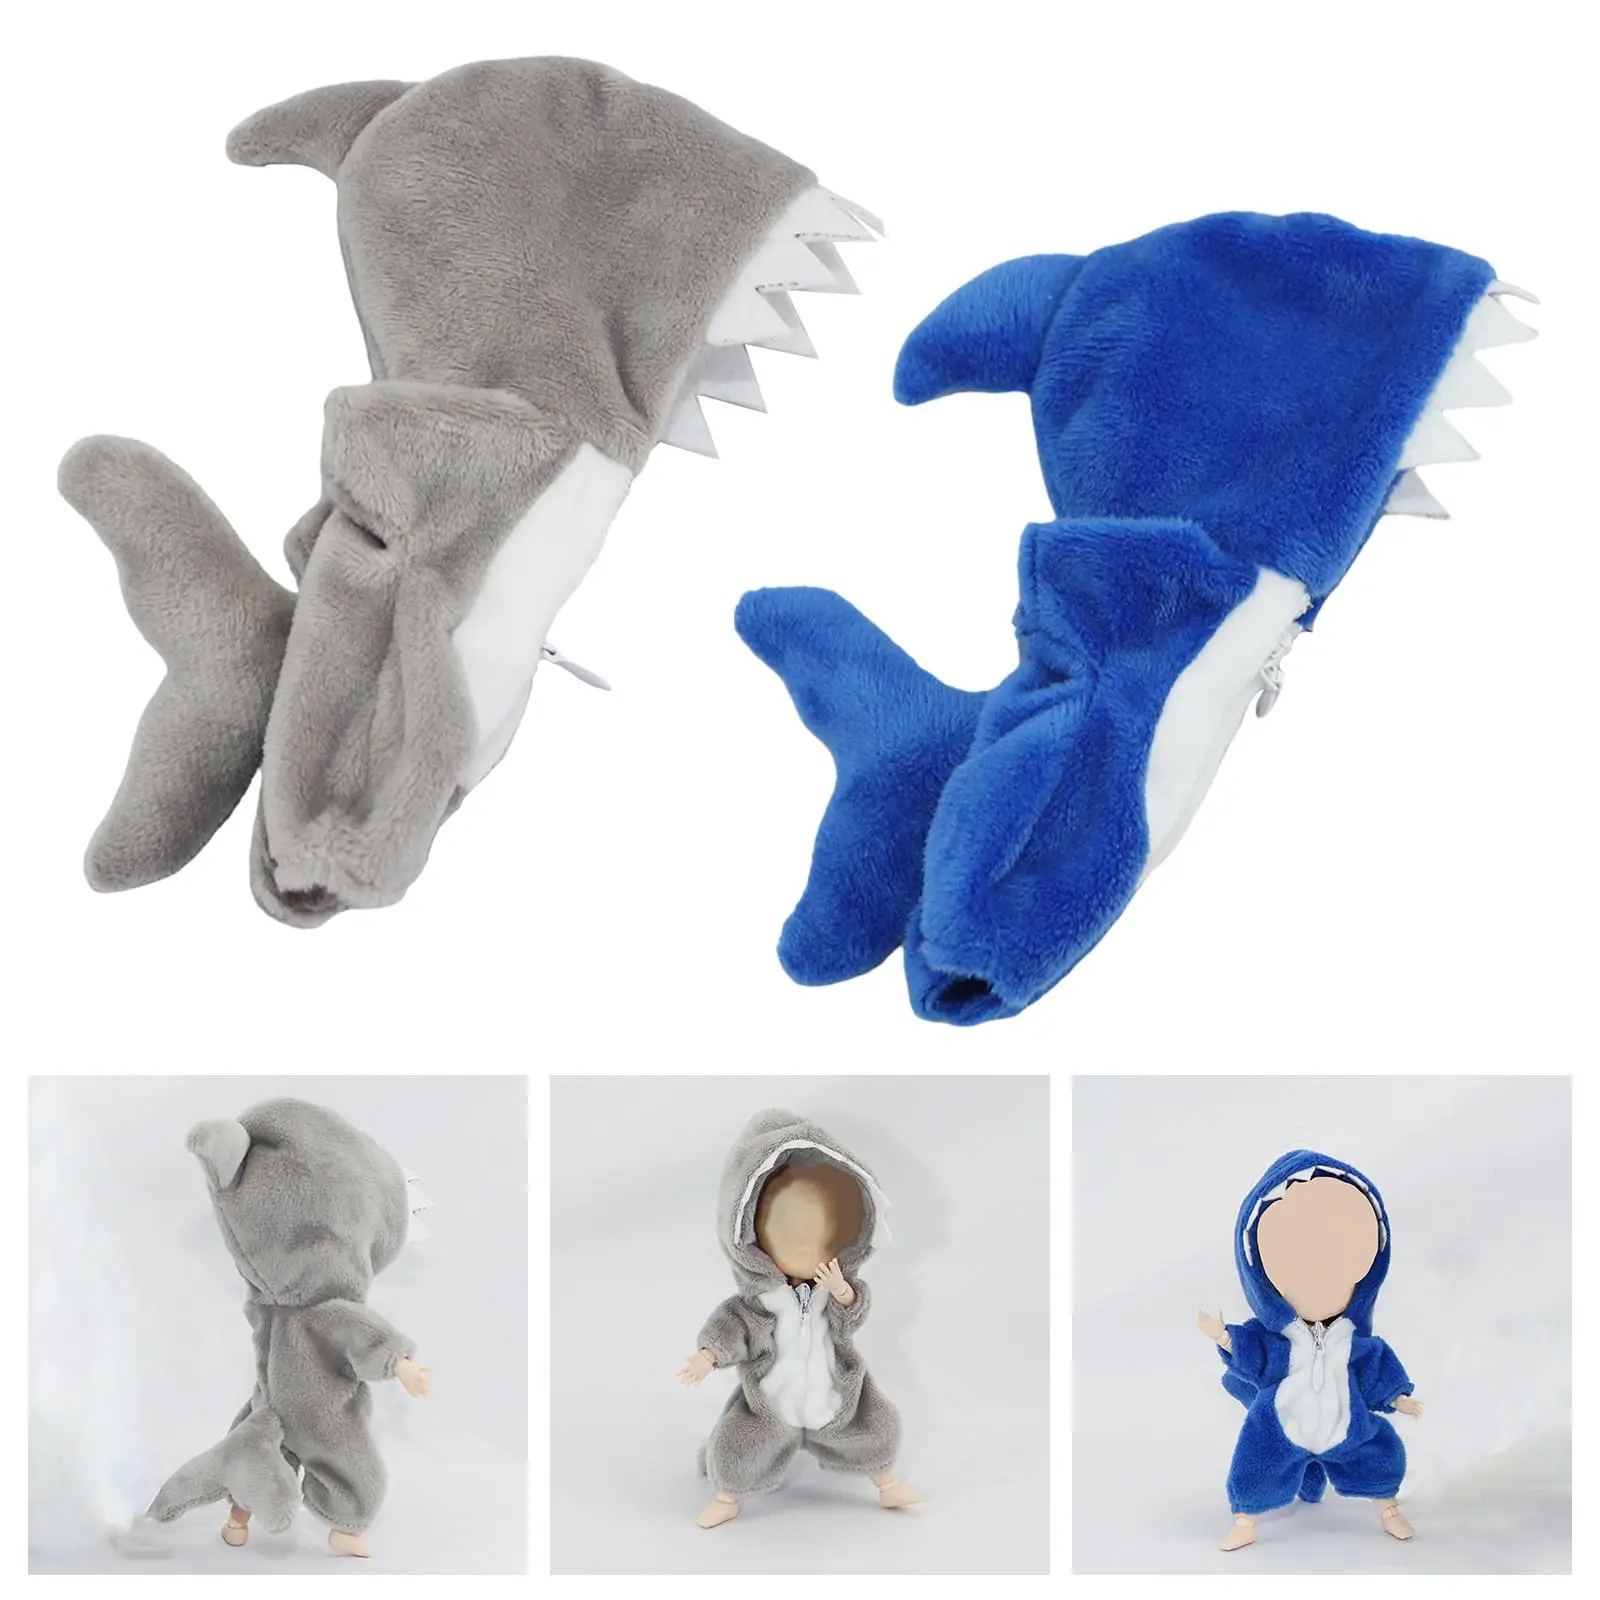 Cute Doll Clothes Shark Bodysuit Cosplay Costume for 1:12 Doll Accessories